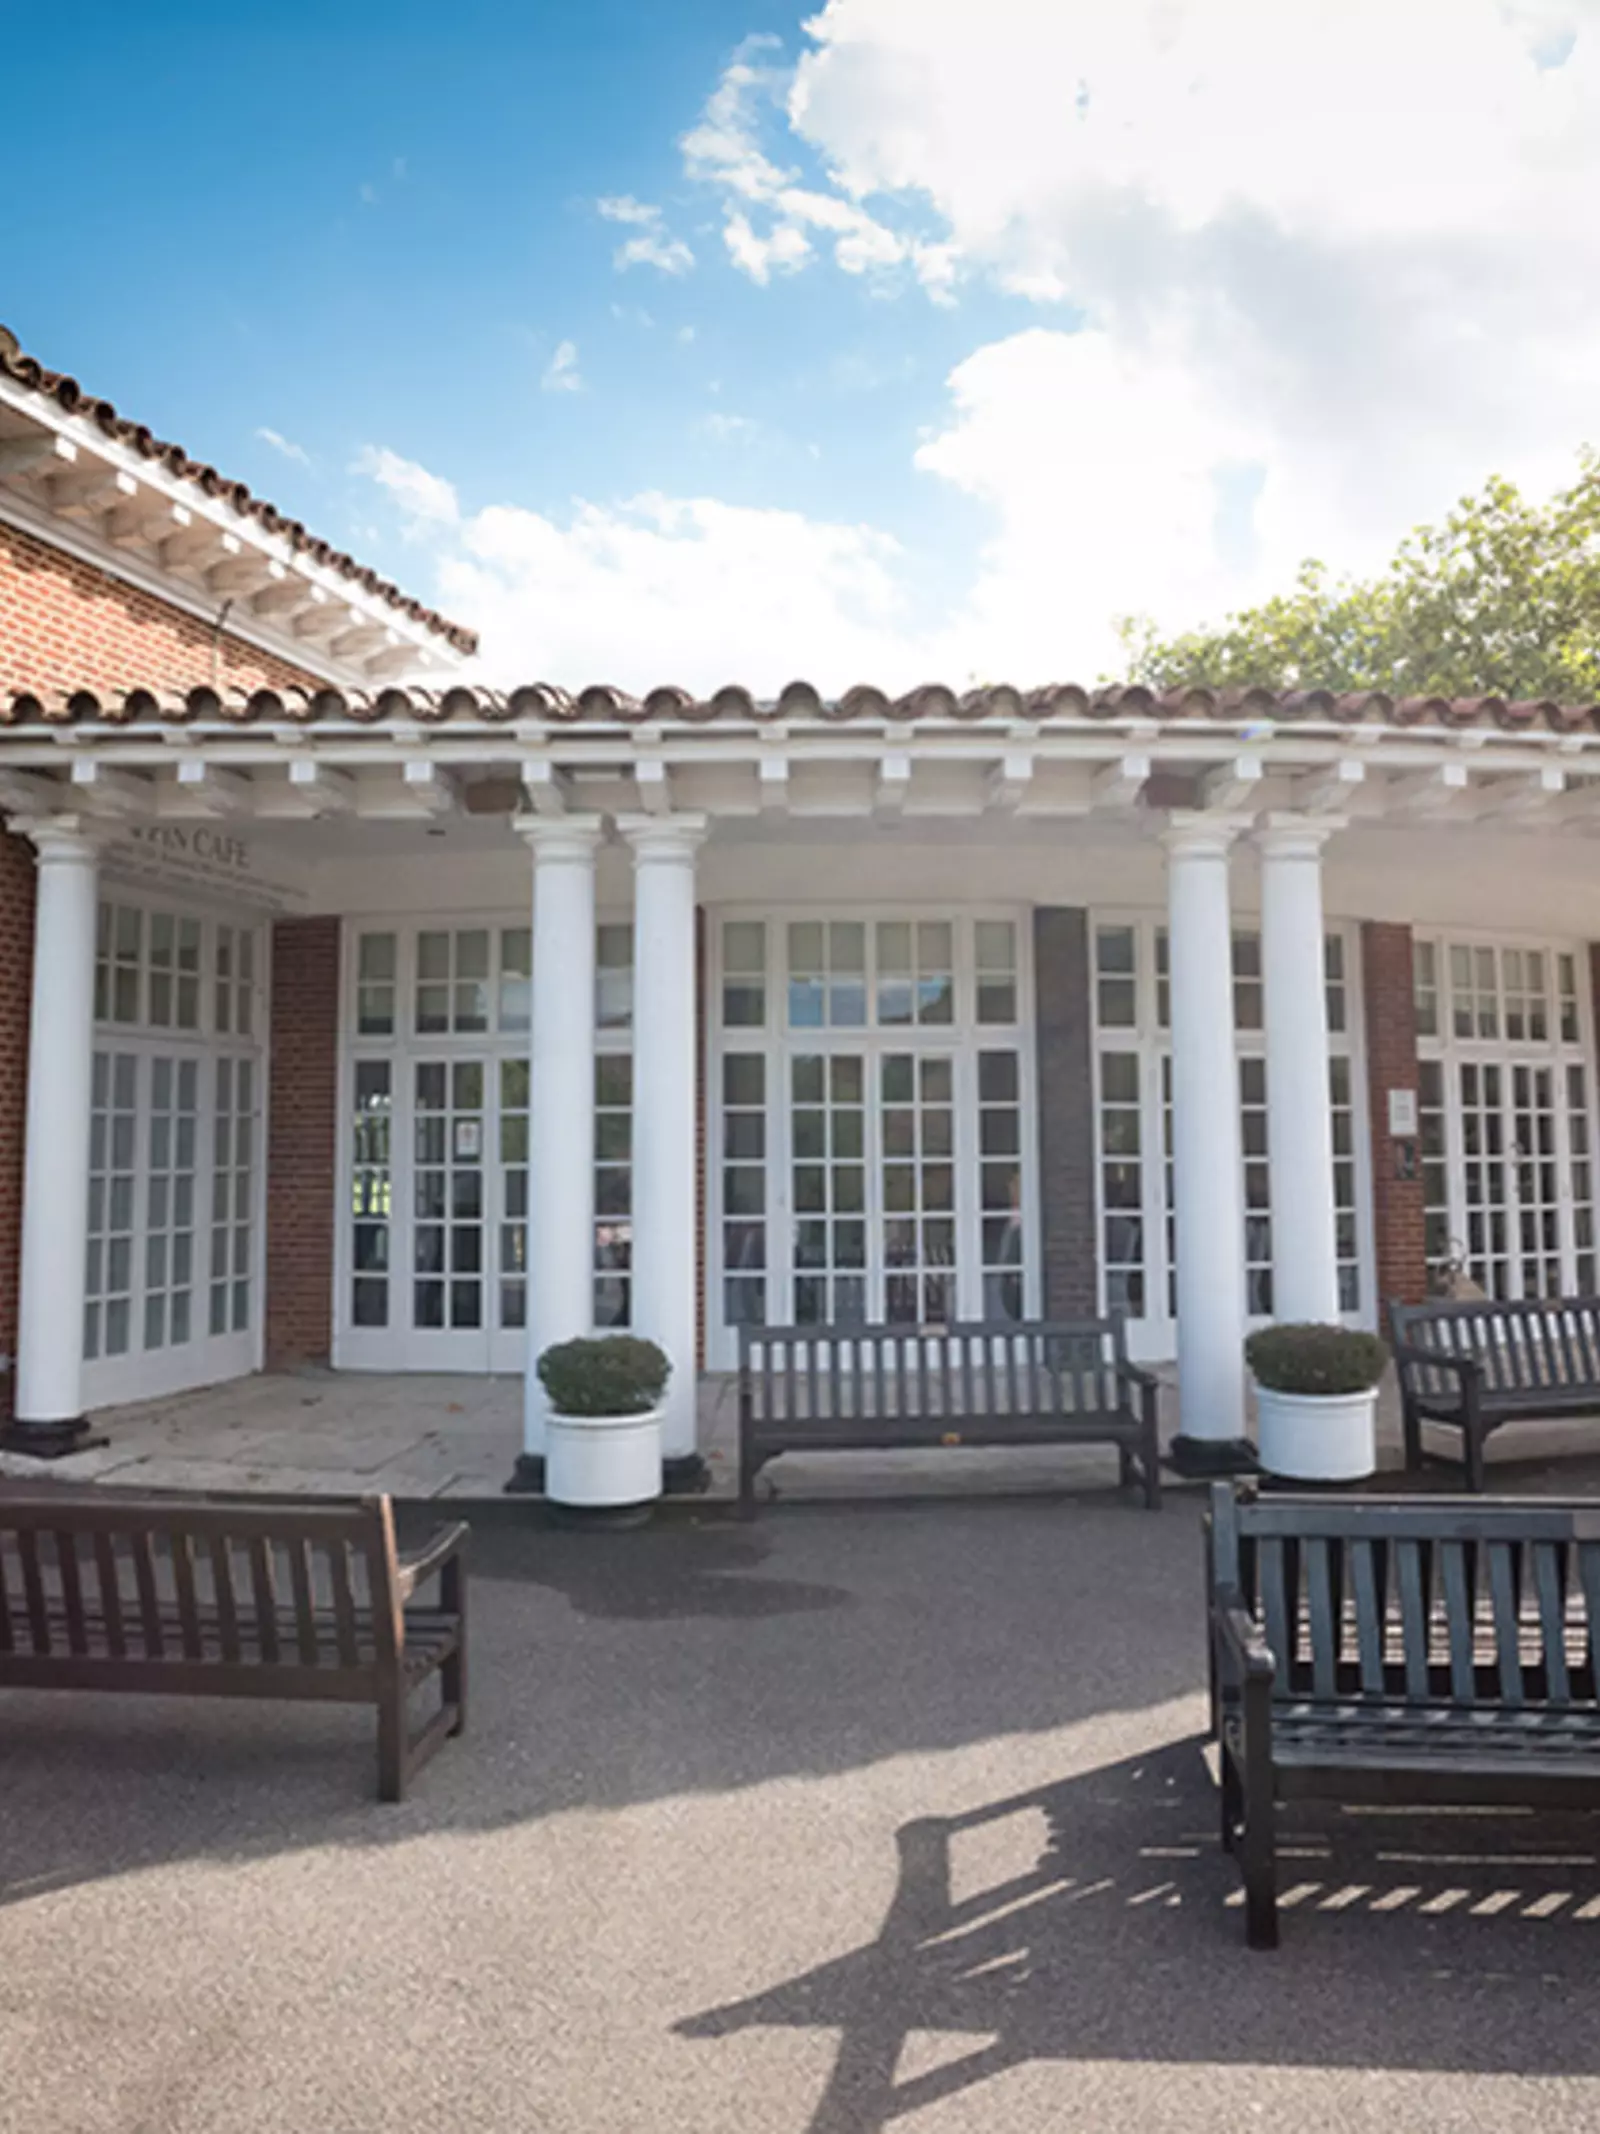 The exterior of the Mappin Pavilion on a sunny day